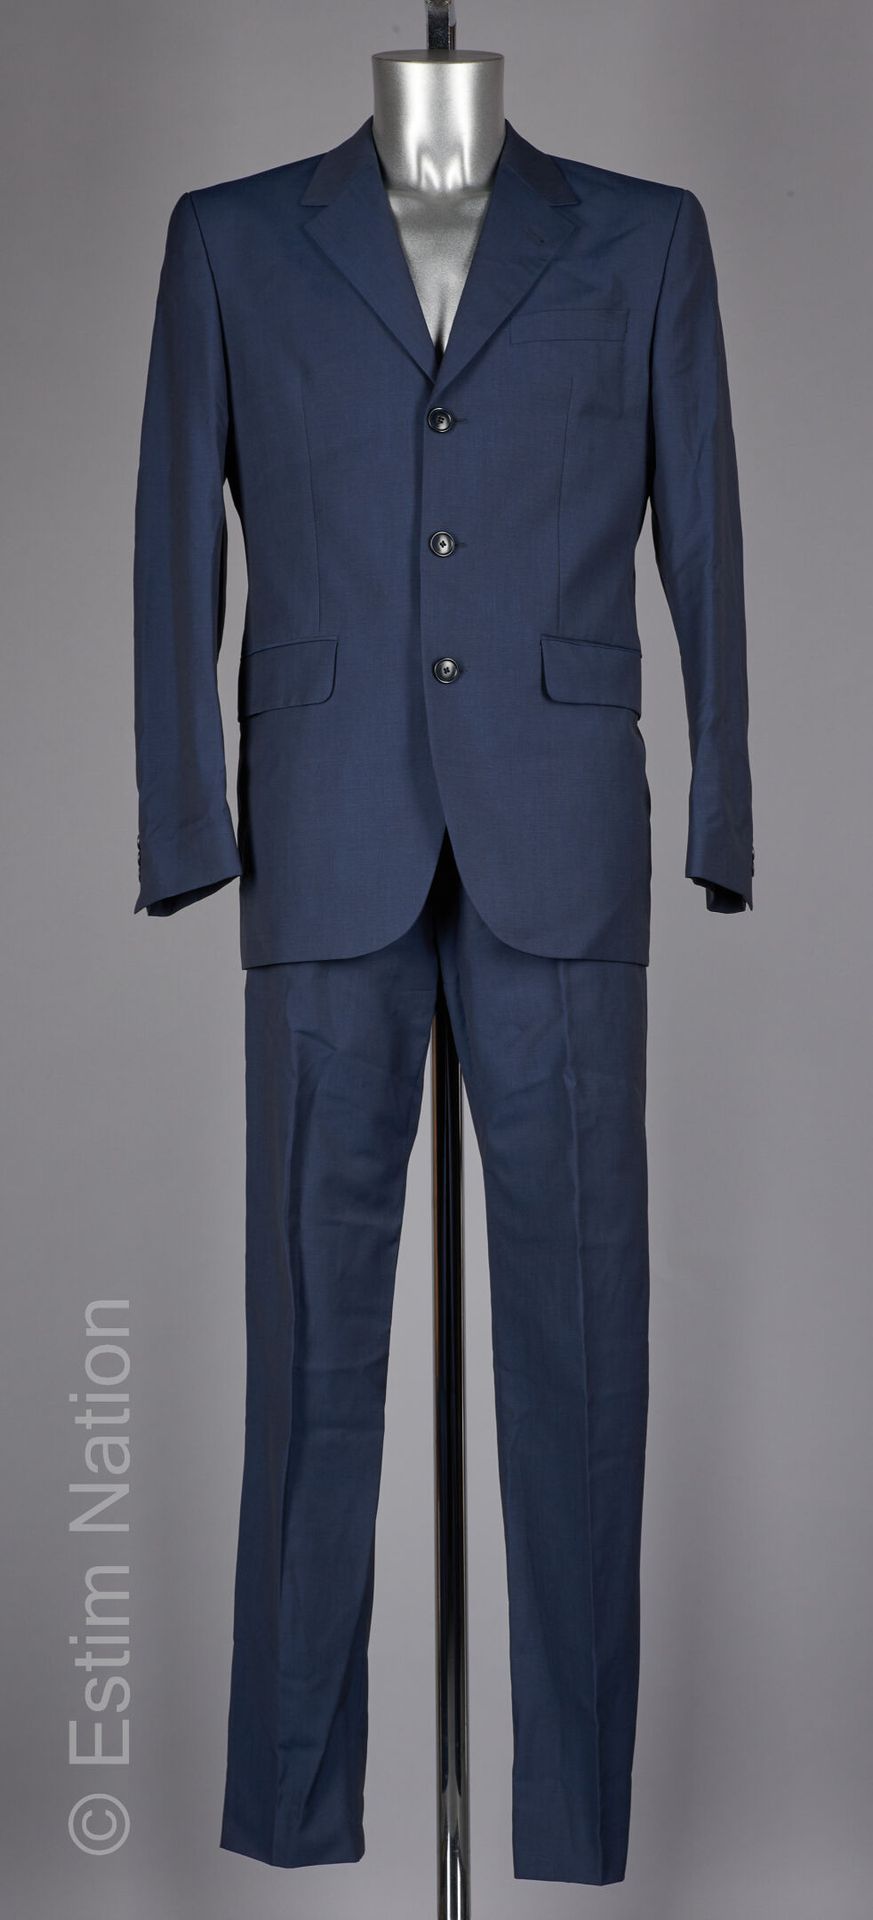 KENZO HOMME COSTUME in cold navy wool (S 48) (with its cover)